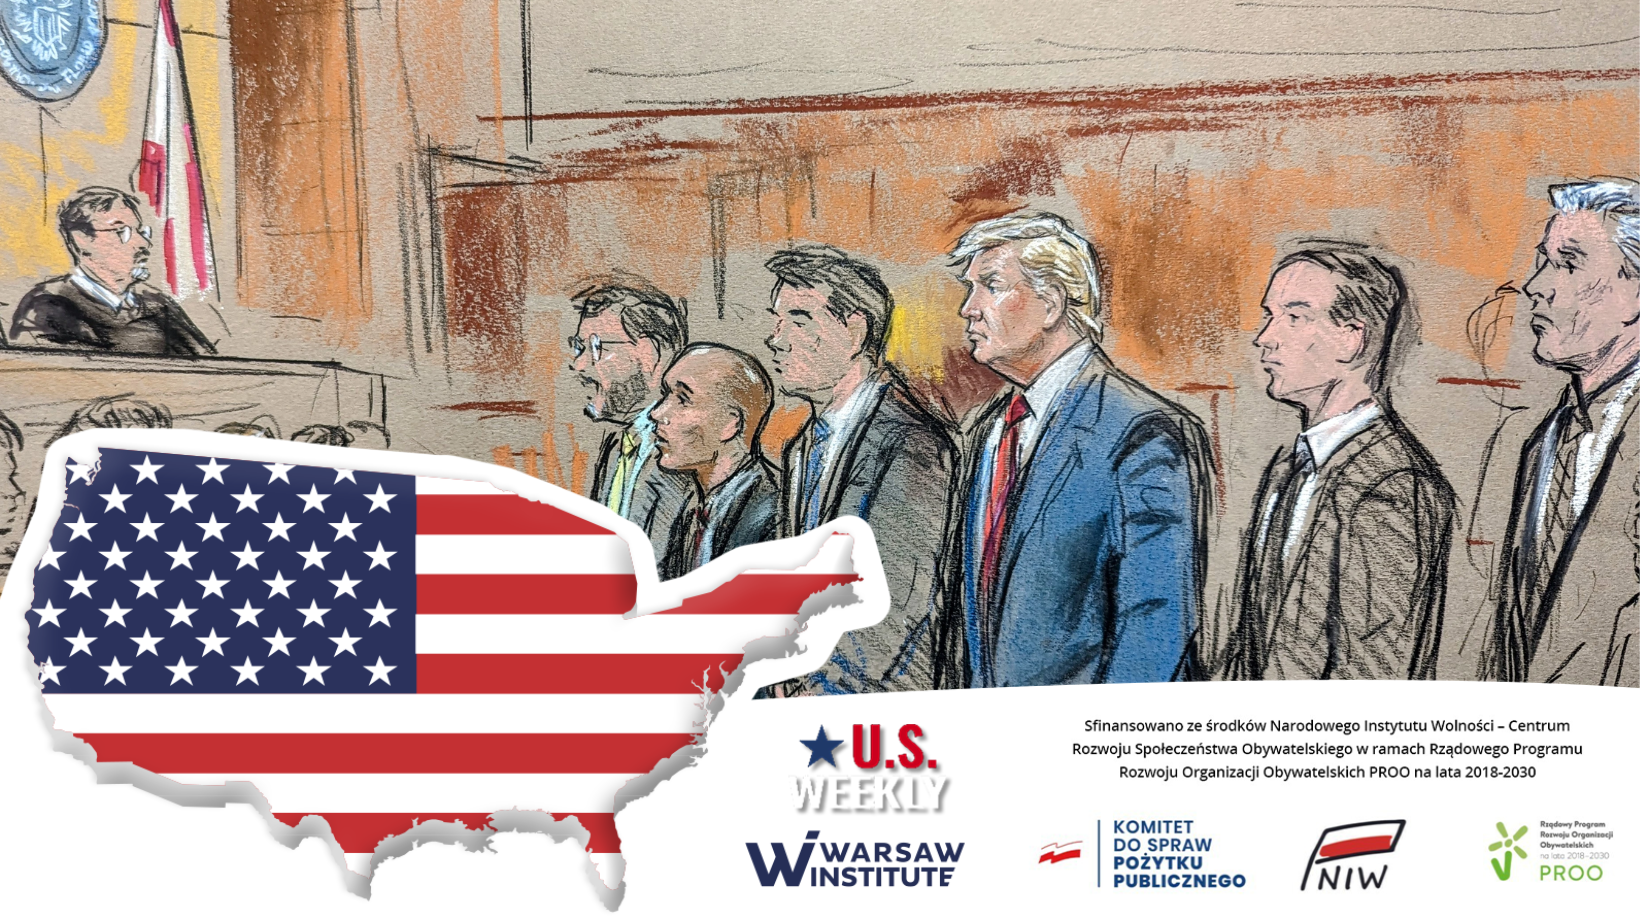 The Federal Case Against Trump and the U.S. 2024 Presidential Election